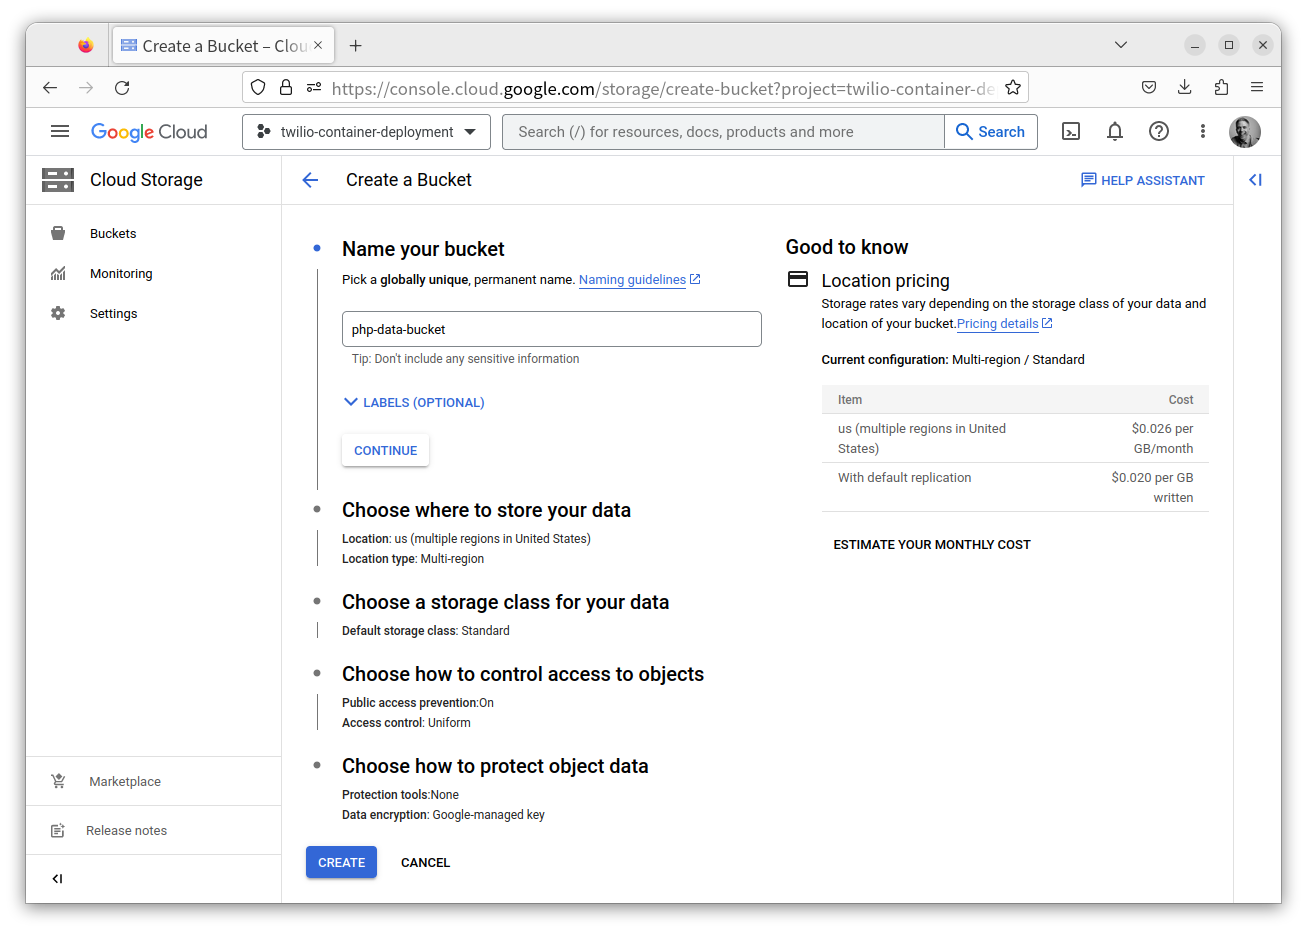 The Create a Bucket wizard in the Google Cloud Storage Console